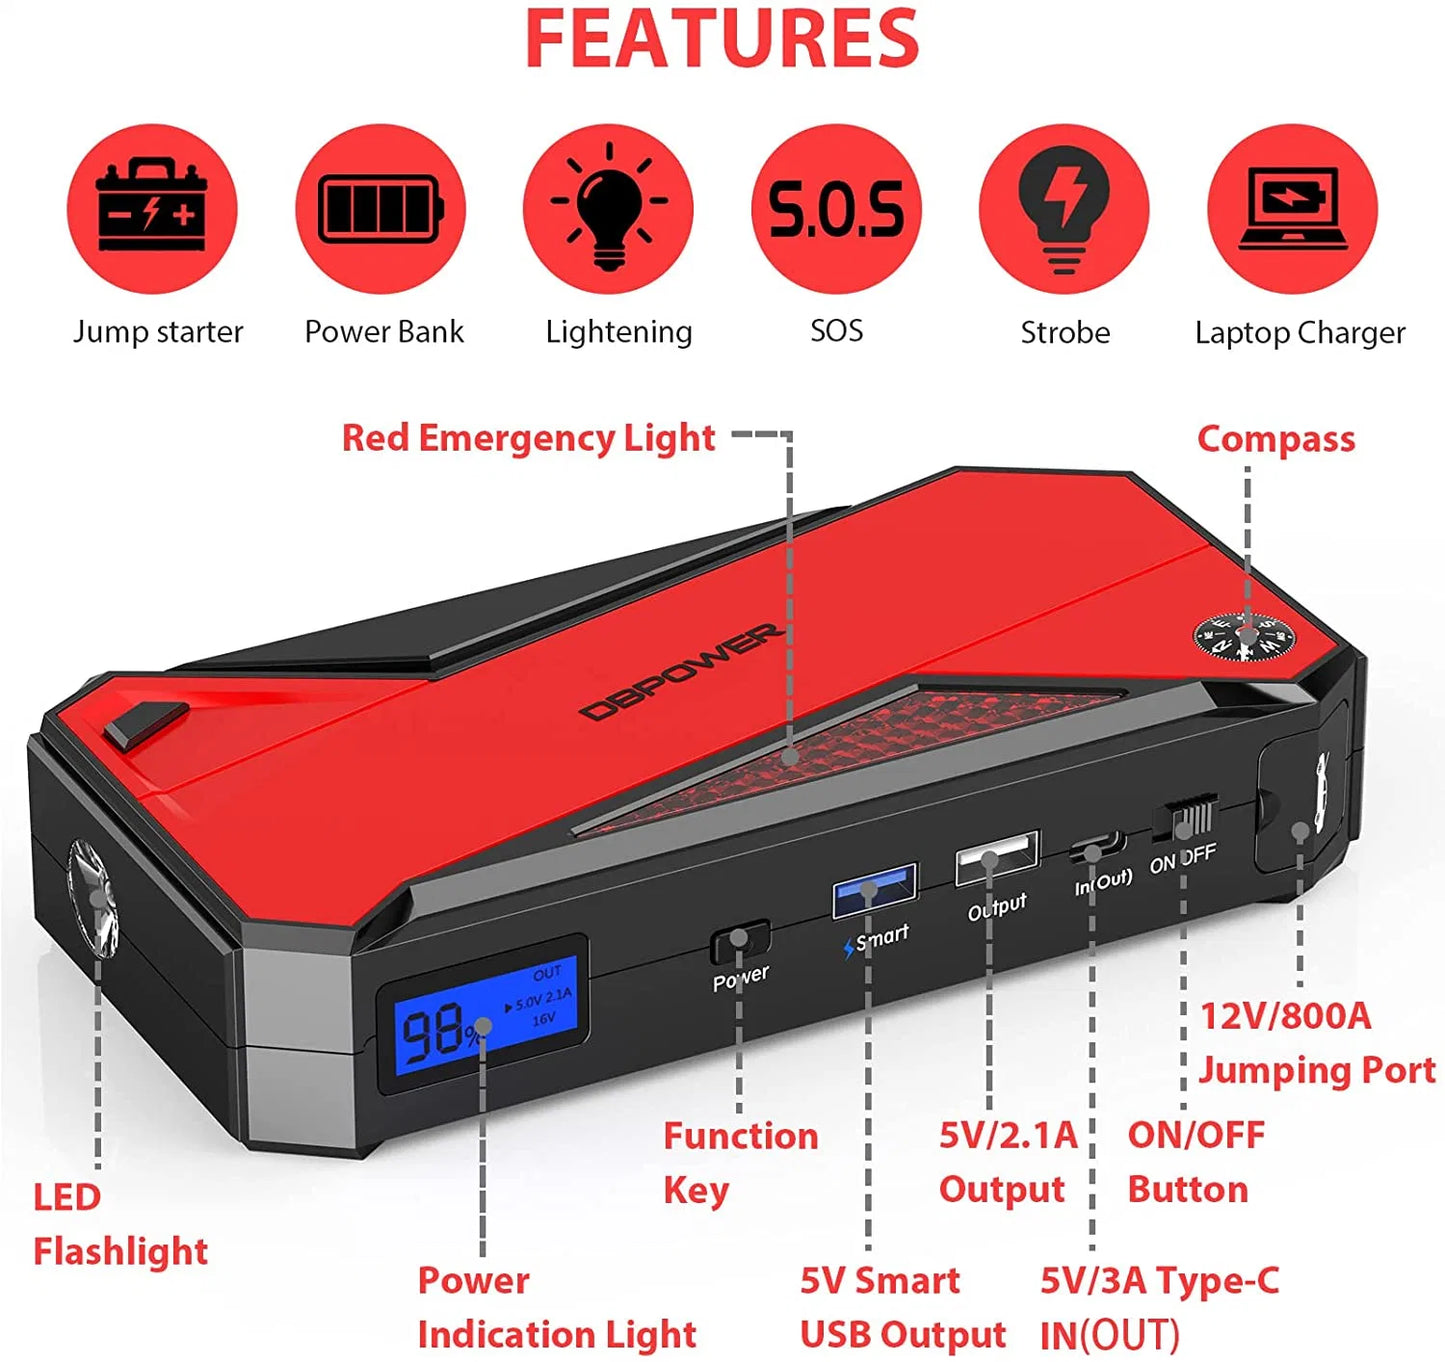 DBPOWER Car Jump Starter, 1600A Peak 18000mAh Portable Power Pack for Up to 7.2L Gas and 5.5L Diesel Engines, 12V Auto Battery Booster with LCD Display, Compass, LED Light and Type C Port